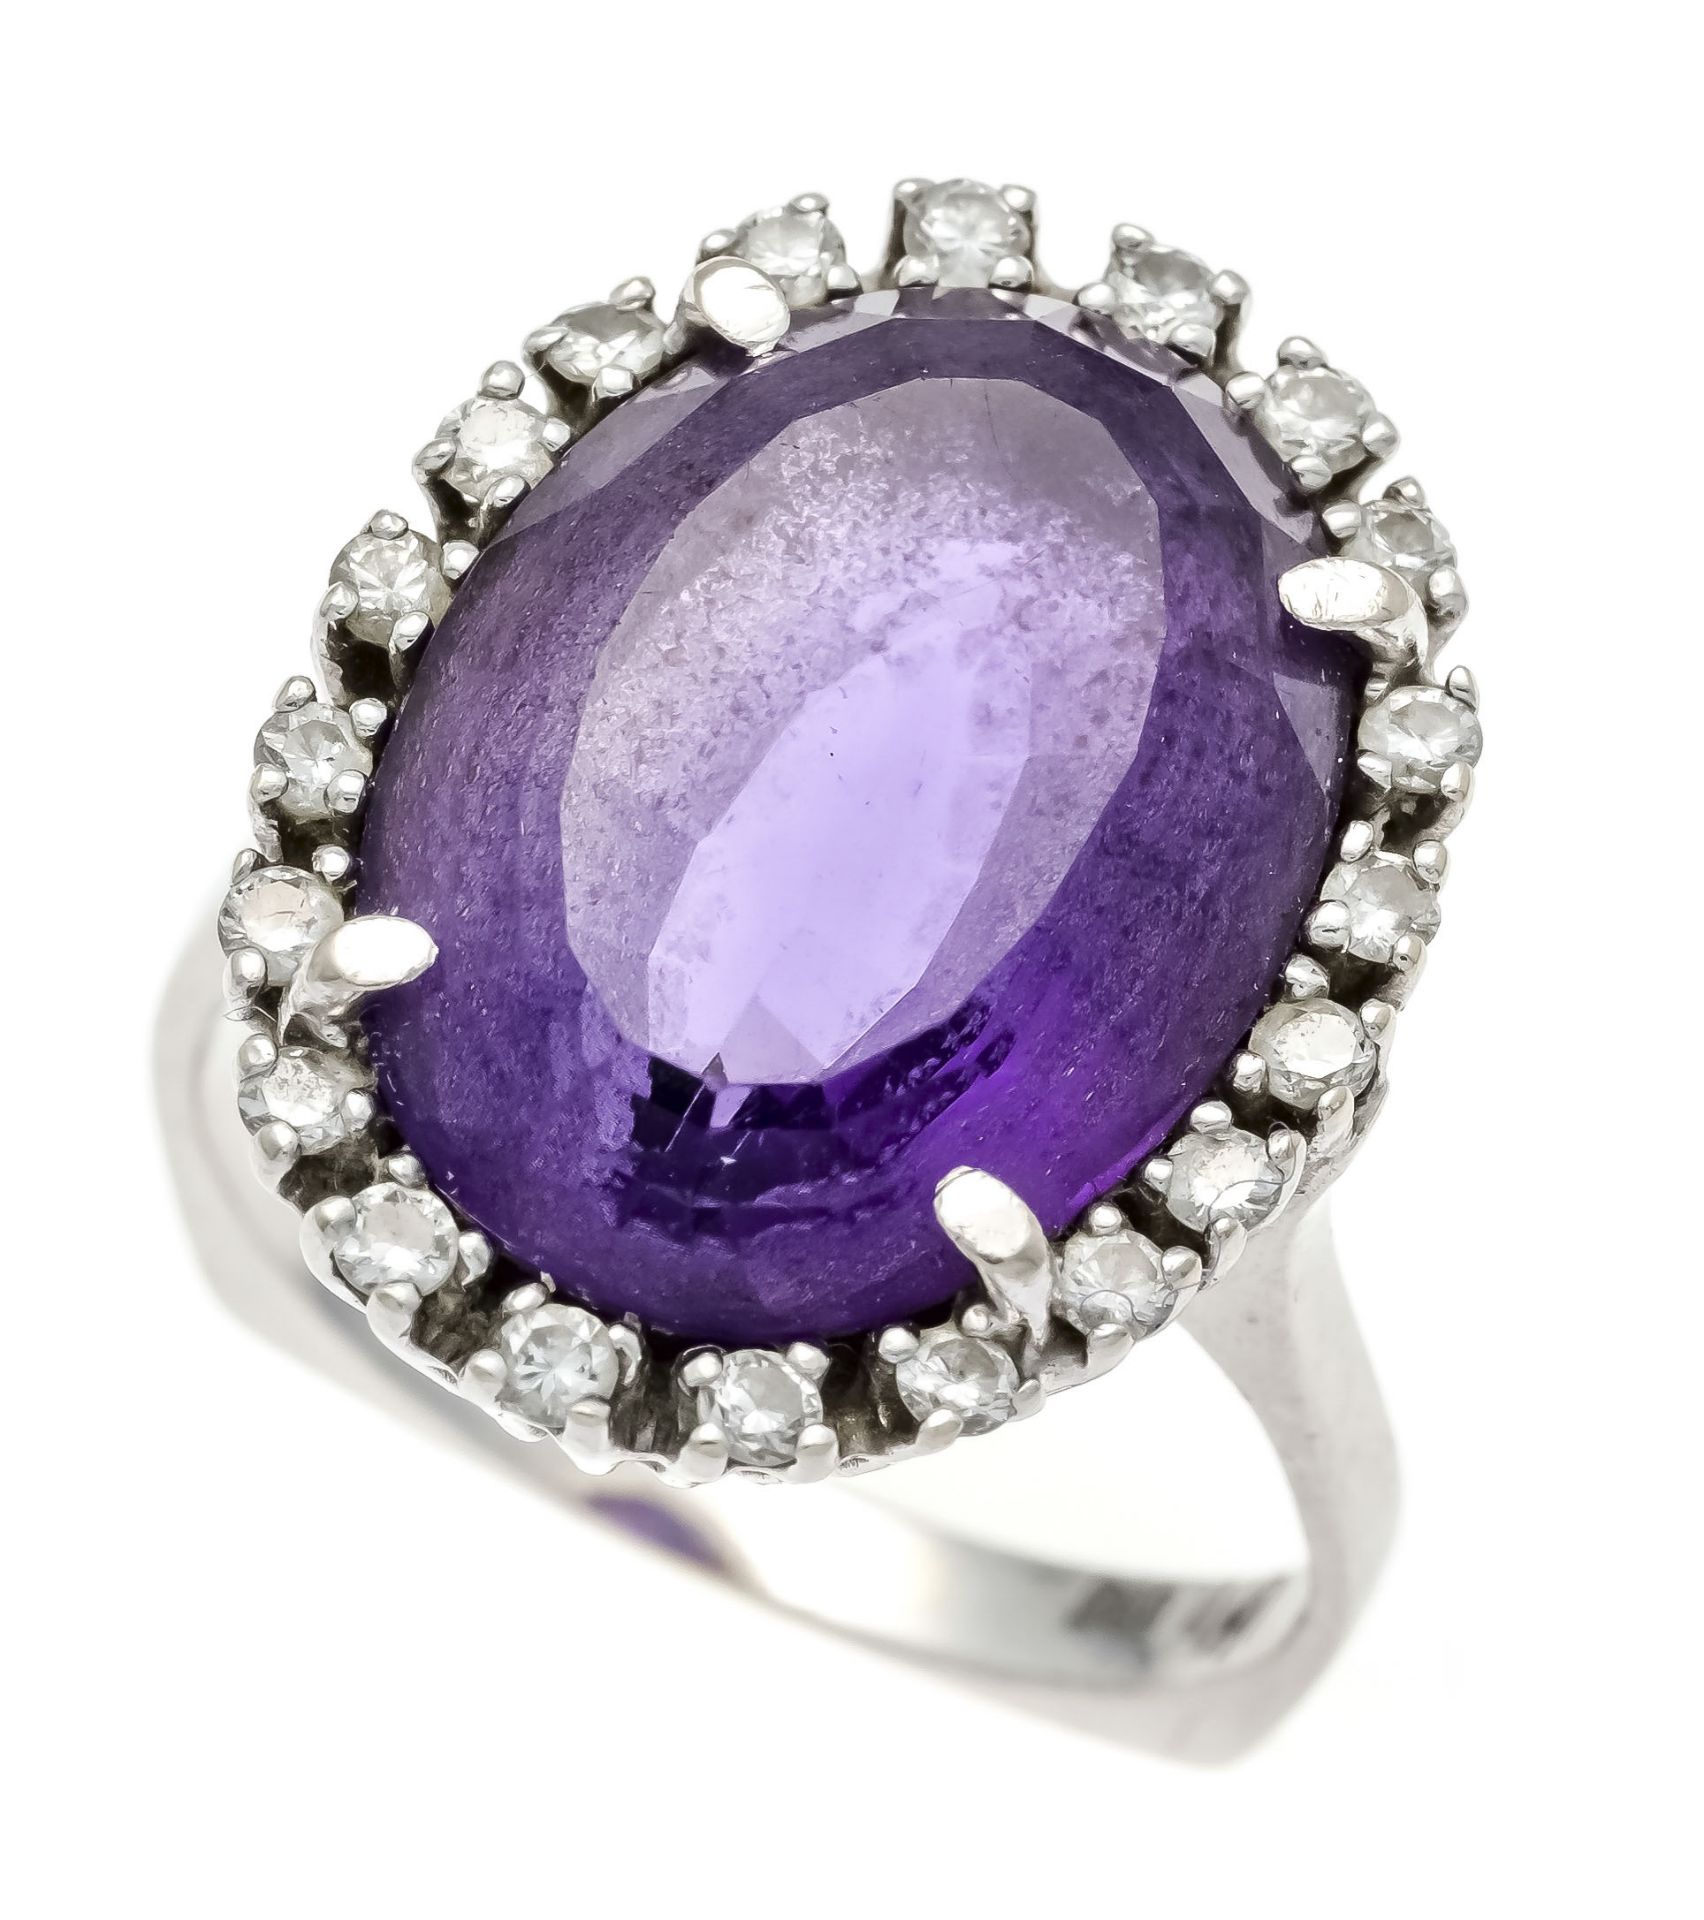 Amethyst ring WG 585/000 with an oval faceted amethyst 17 x 12.5 mm and 20 brilliant-cut diamonds,